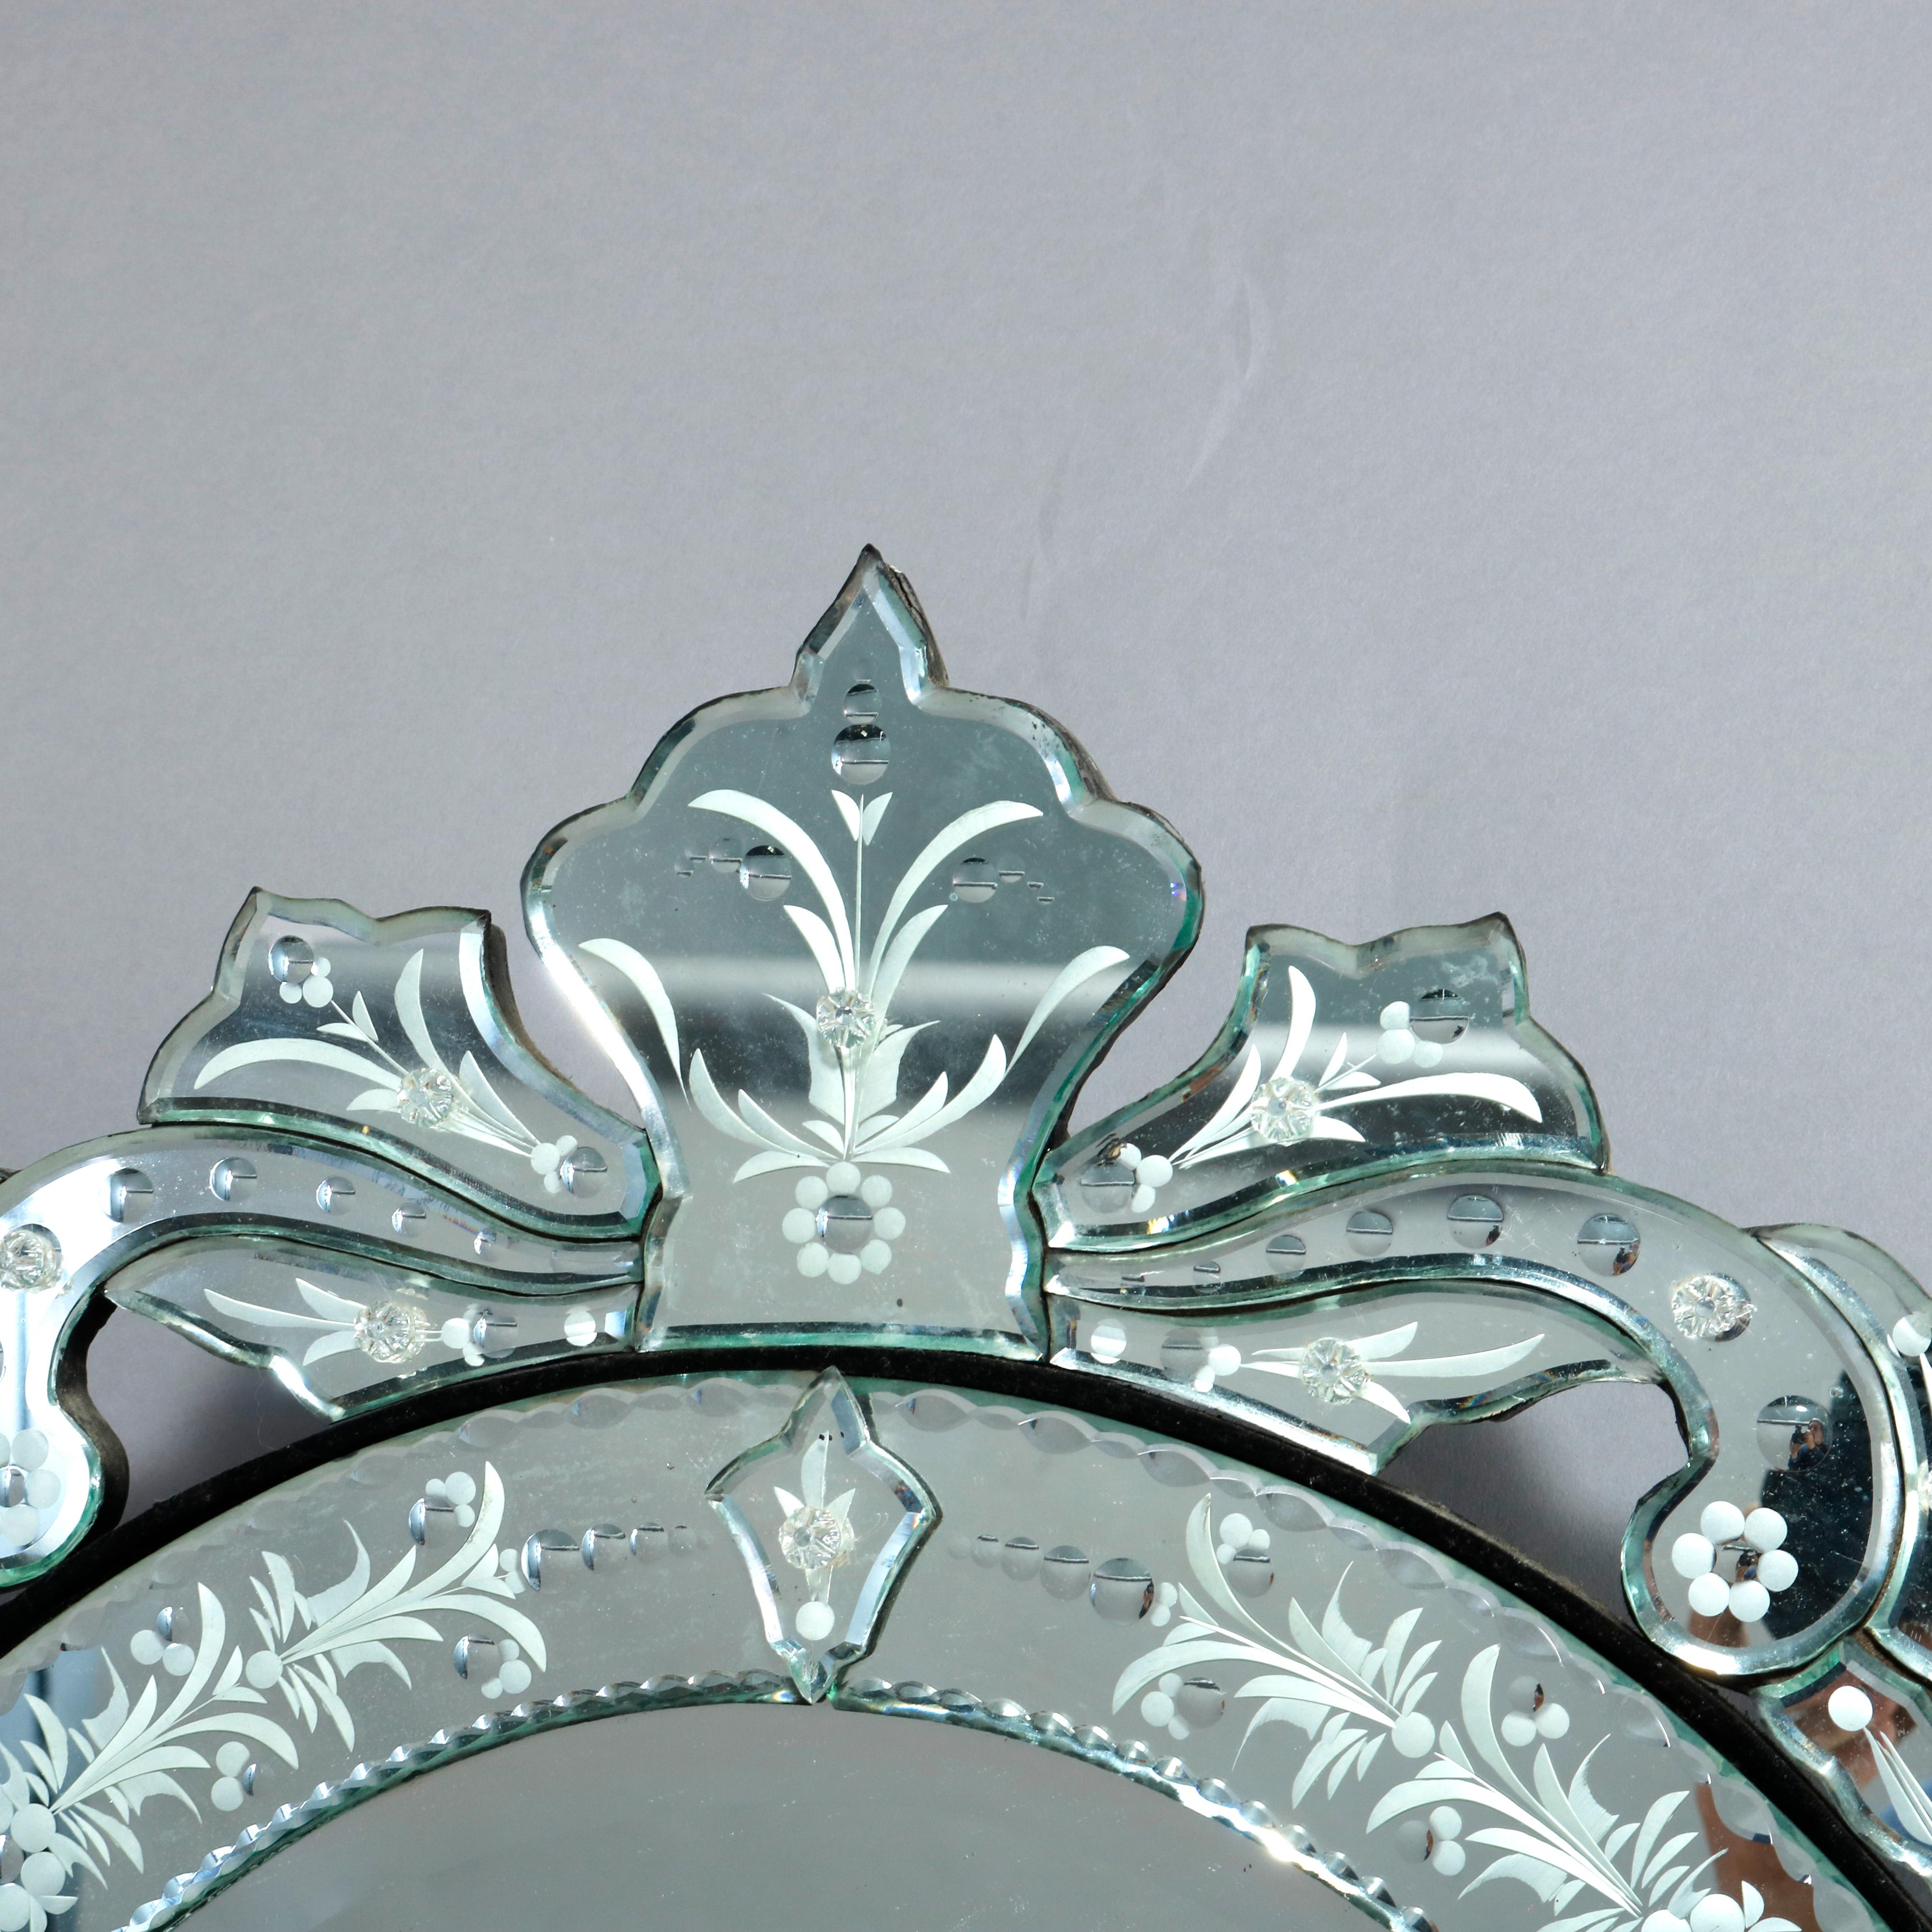 An antique Venetian style wall mirror offers round form with scroll and foliate crest surmounting round mirror, foliate and floral etching throughout, 20th century

Measures: 28.5